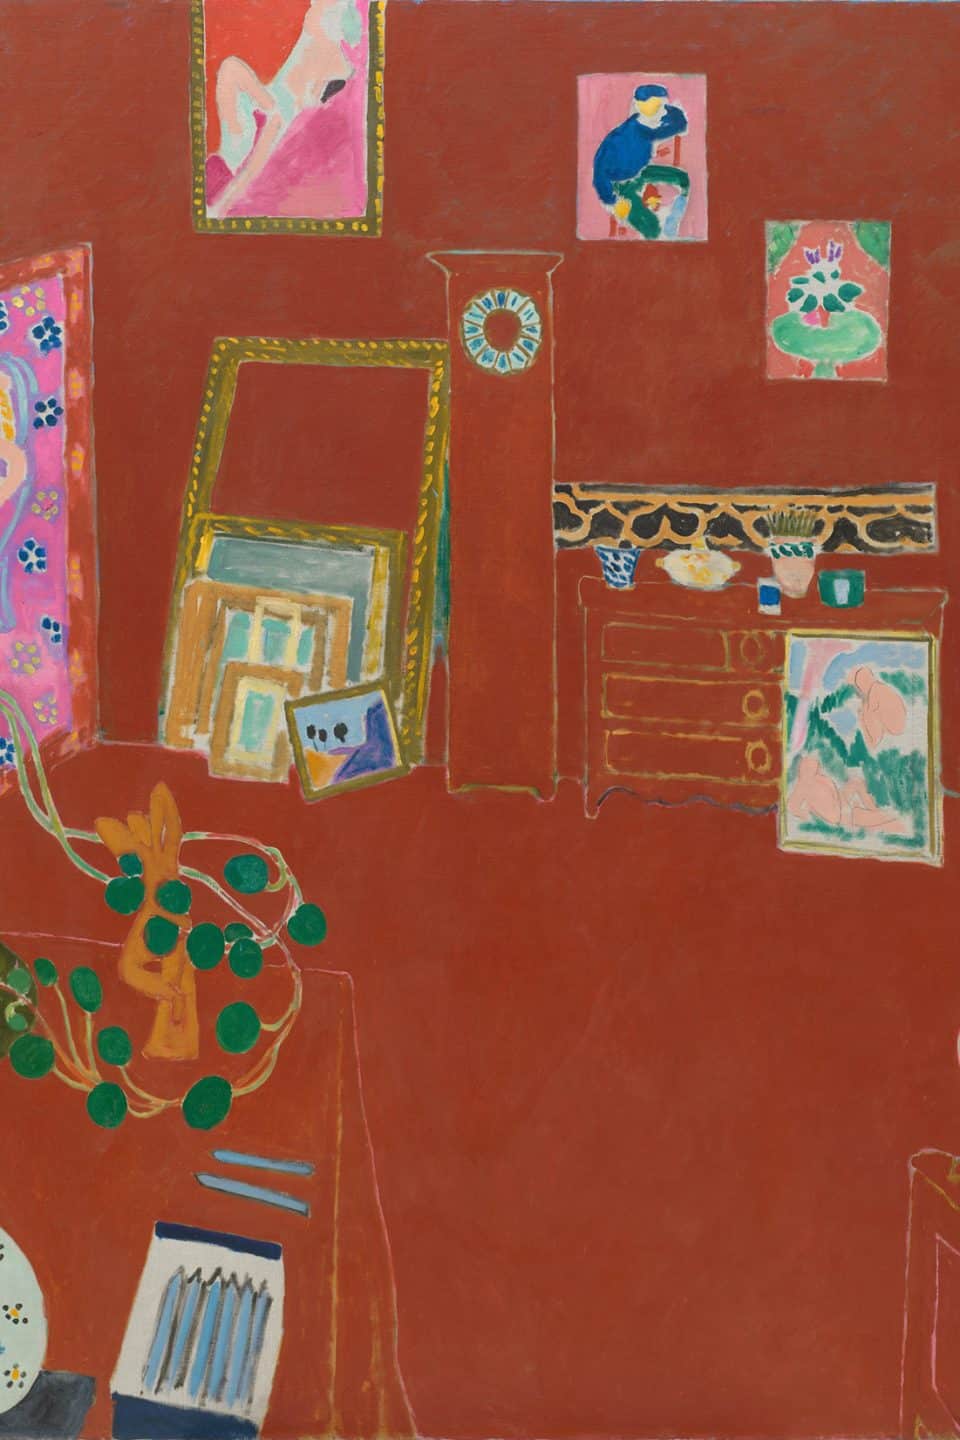 At MoMA, Matisse’s Famed ‘Red Studio’ Painting Is Re-Created in Real Life